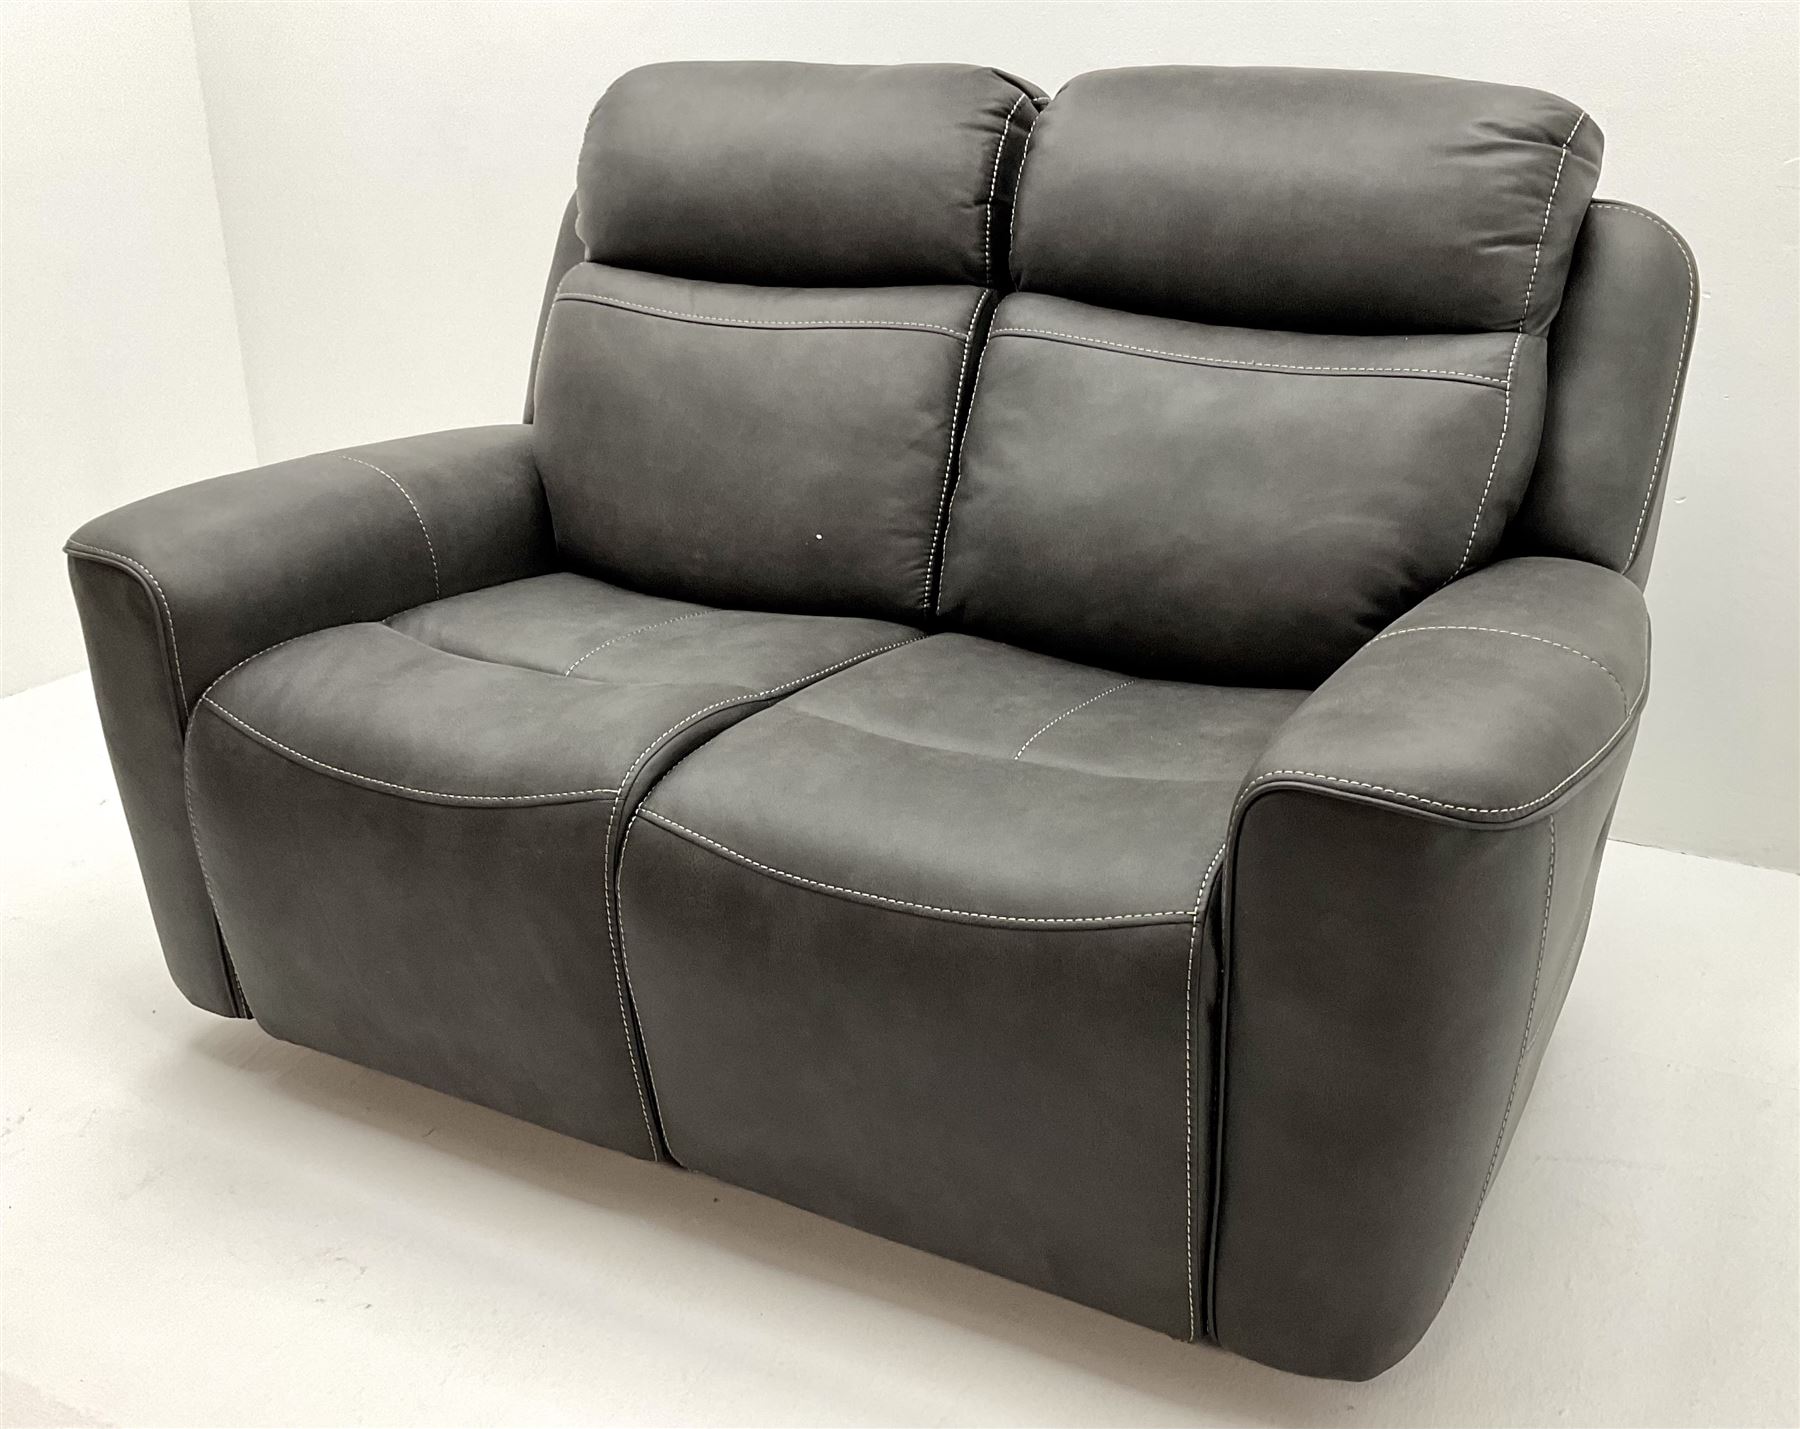 Pair of two seat electric reclining sofas - Image 2 of 6